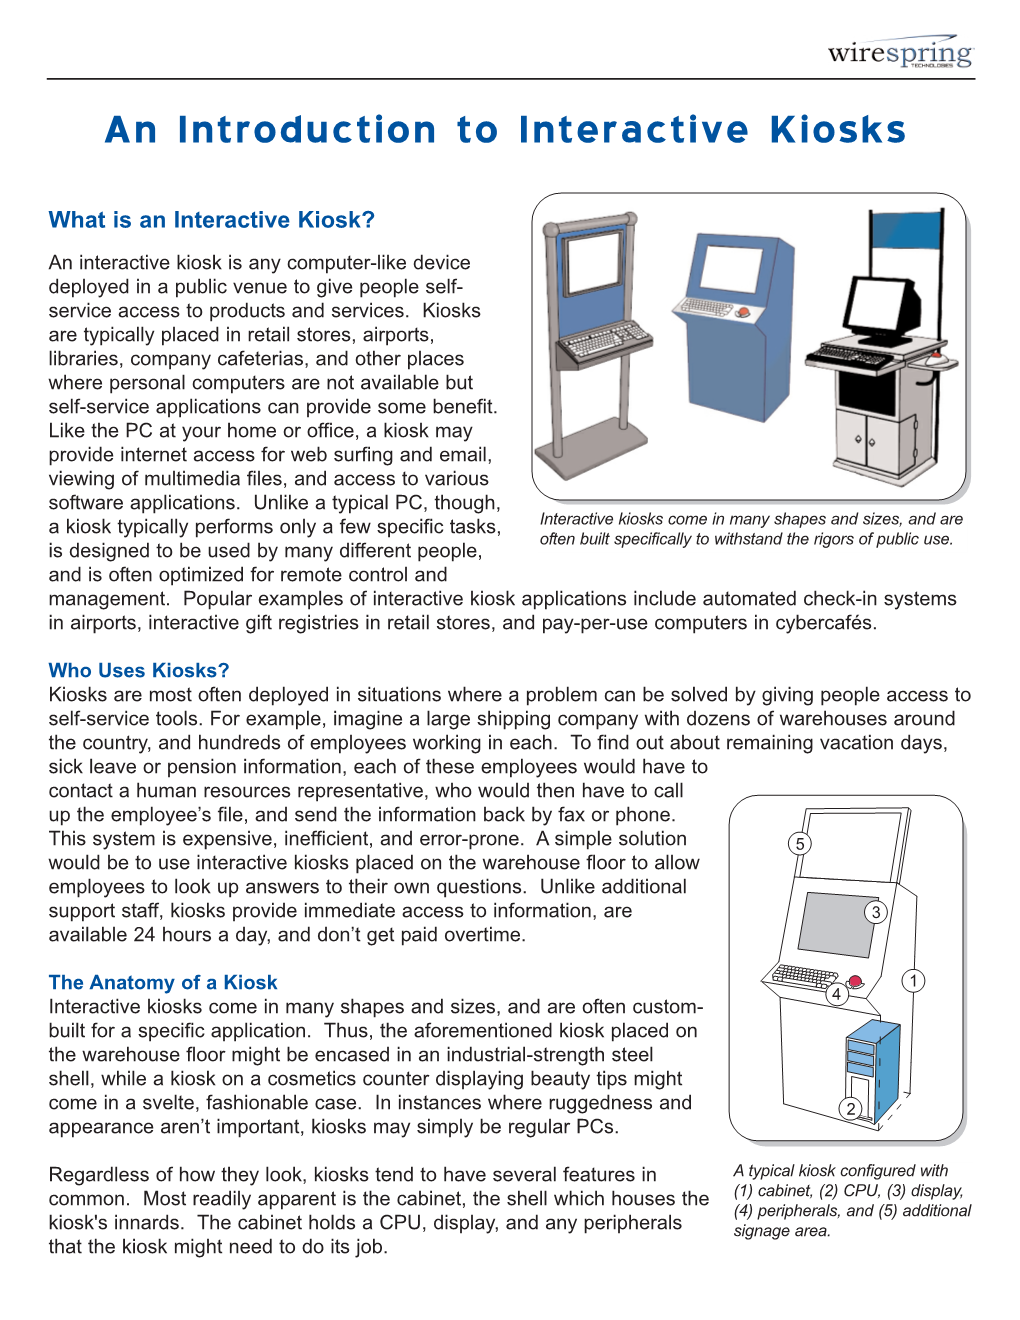 An Introduction to Interactive Kiosks